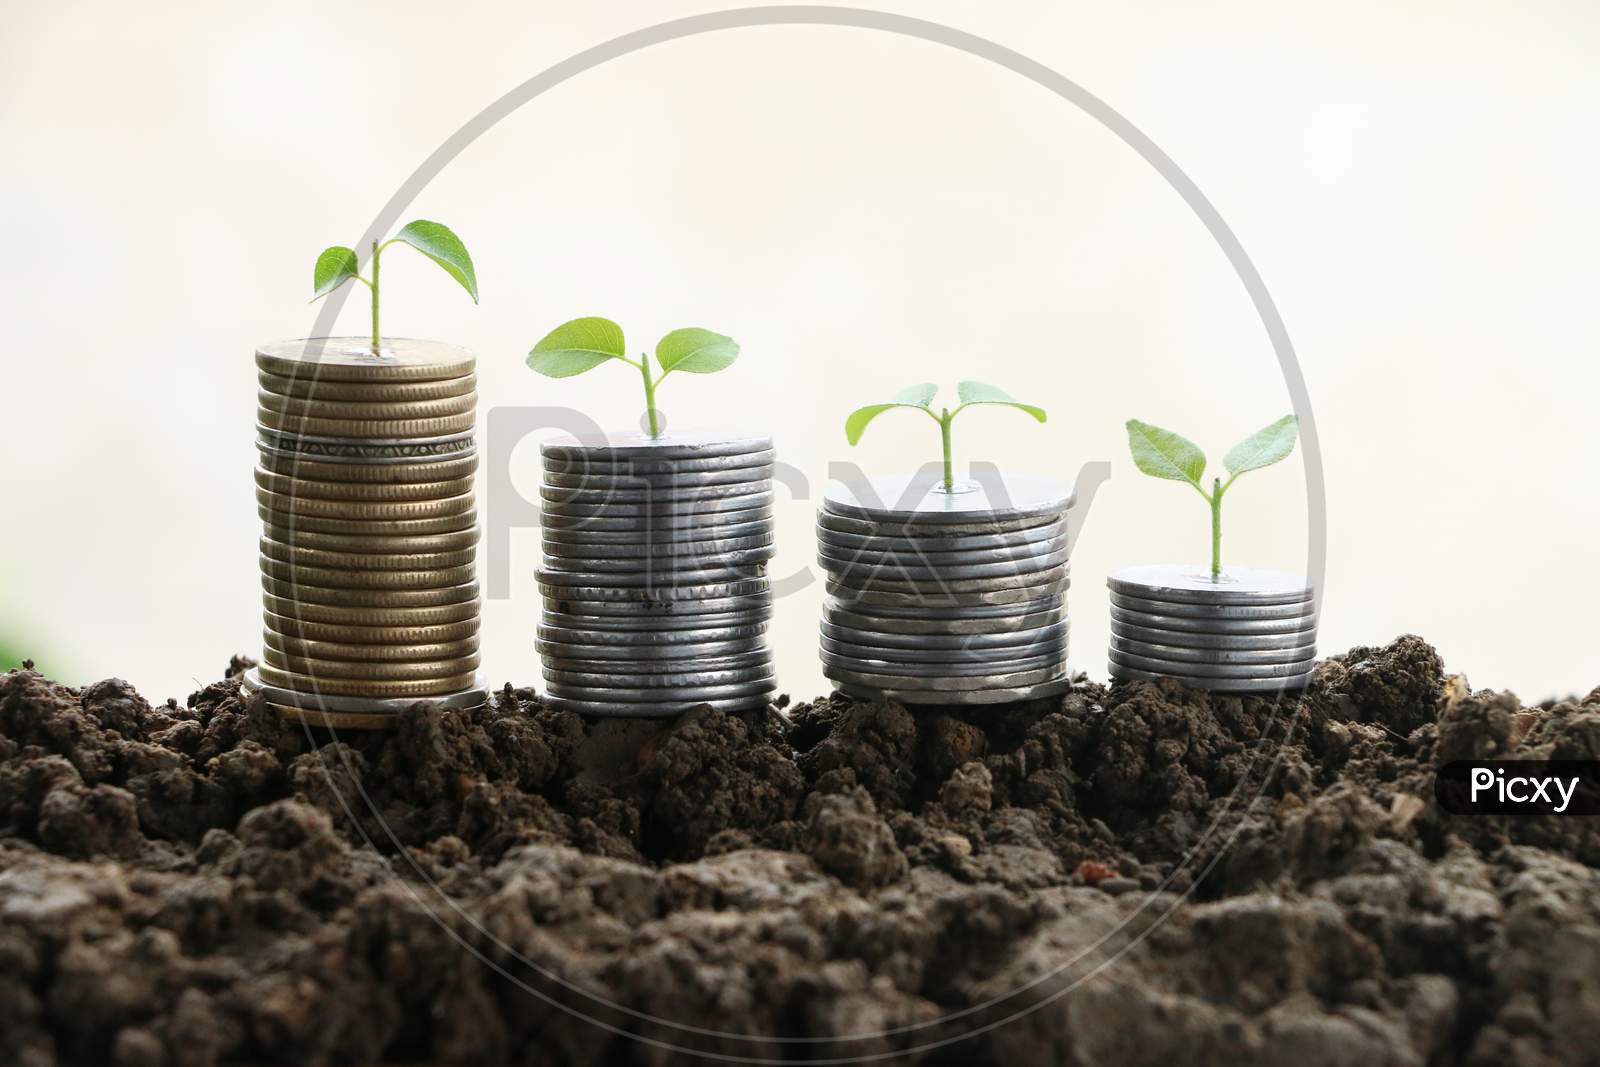 Coins And Plants Are Grown On A Pile Of Coins For Finance And Banking. The Idea Of Saving Money And Increasing Finances.